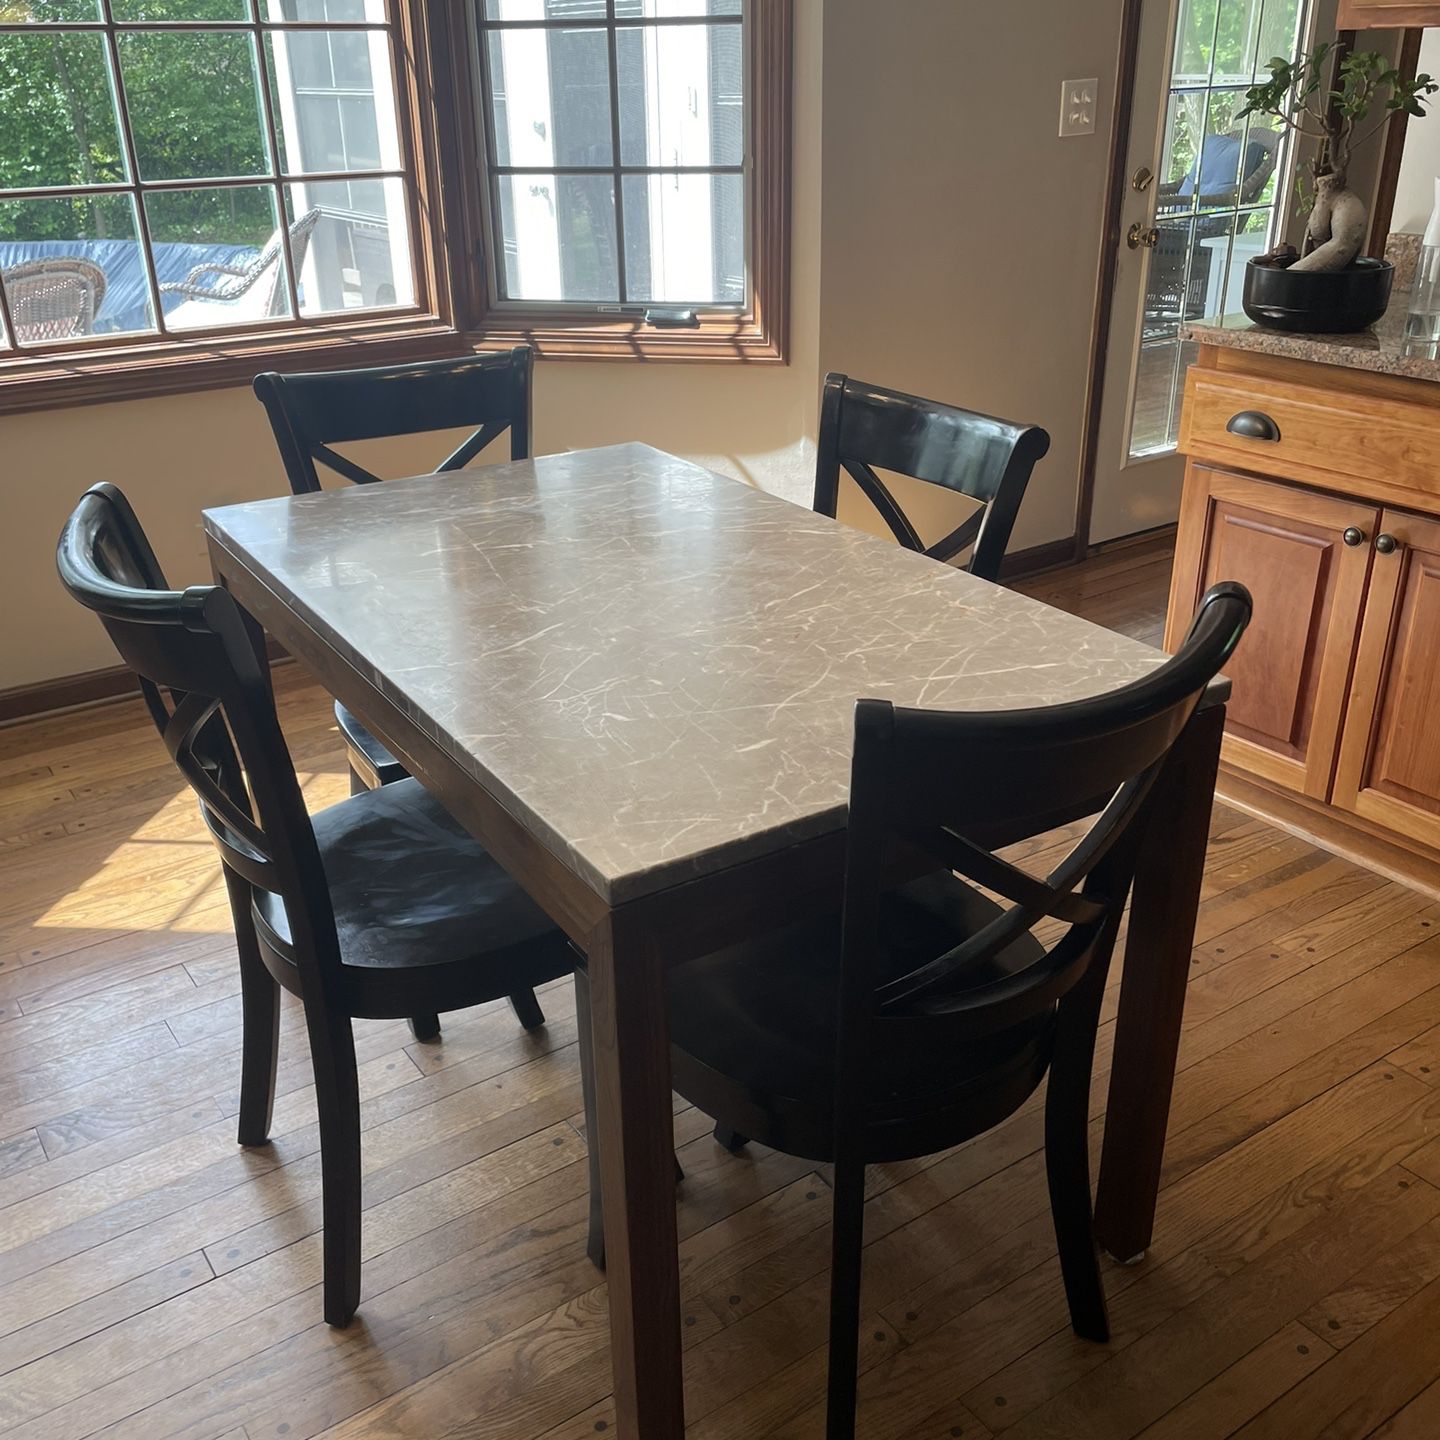 Crate & Barrel Dinning Table And Chairs